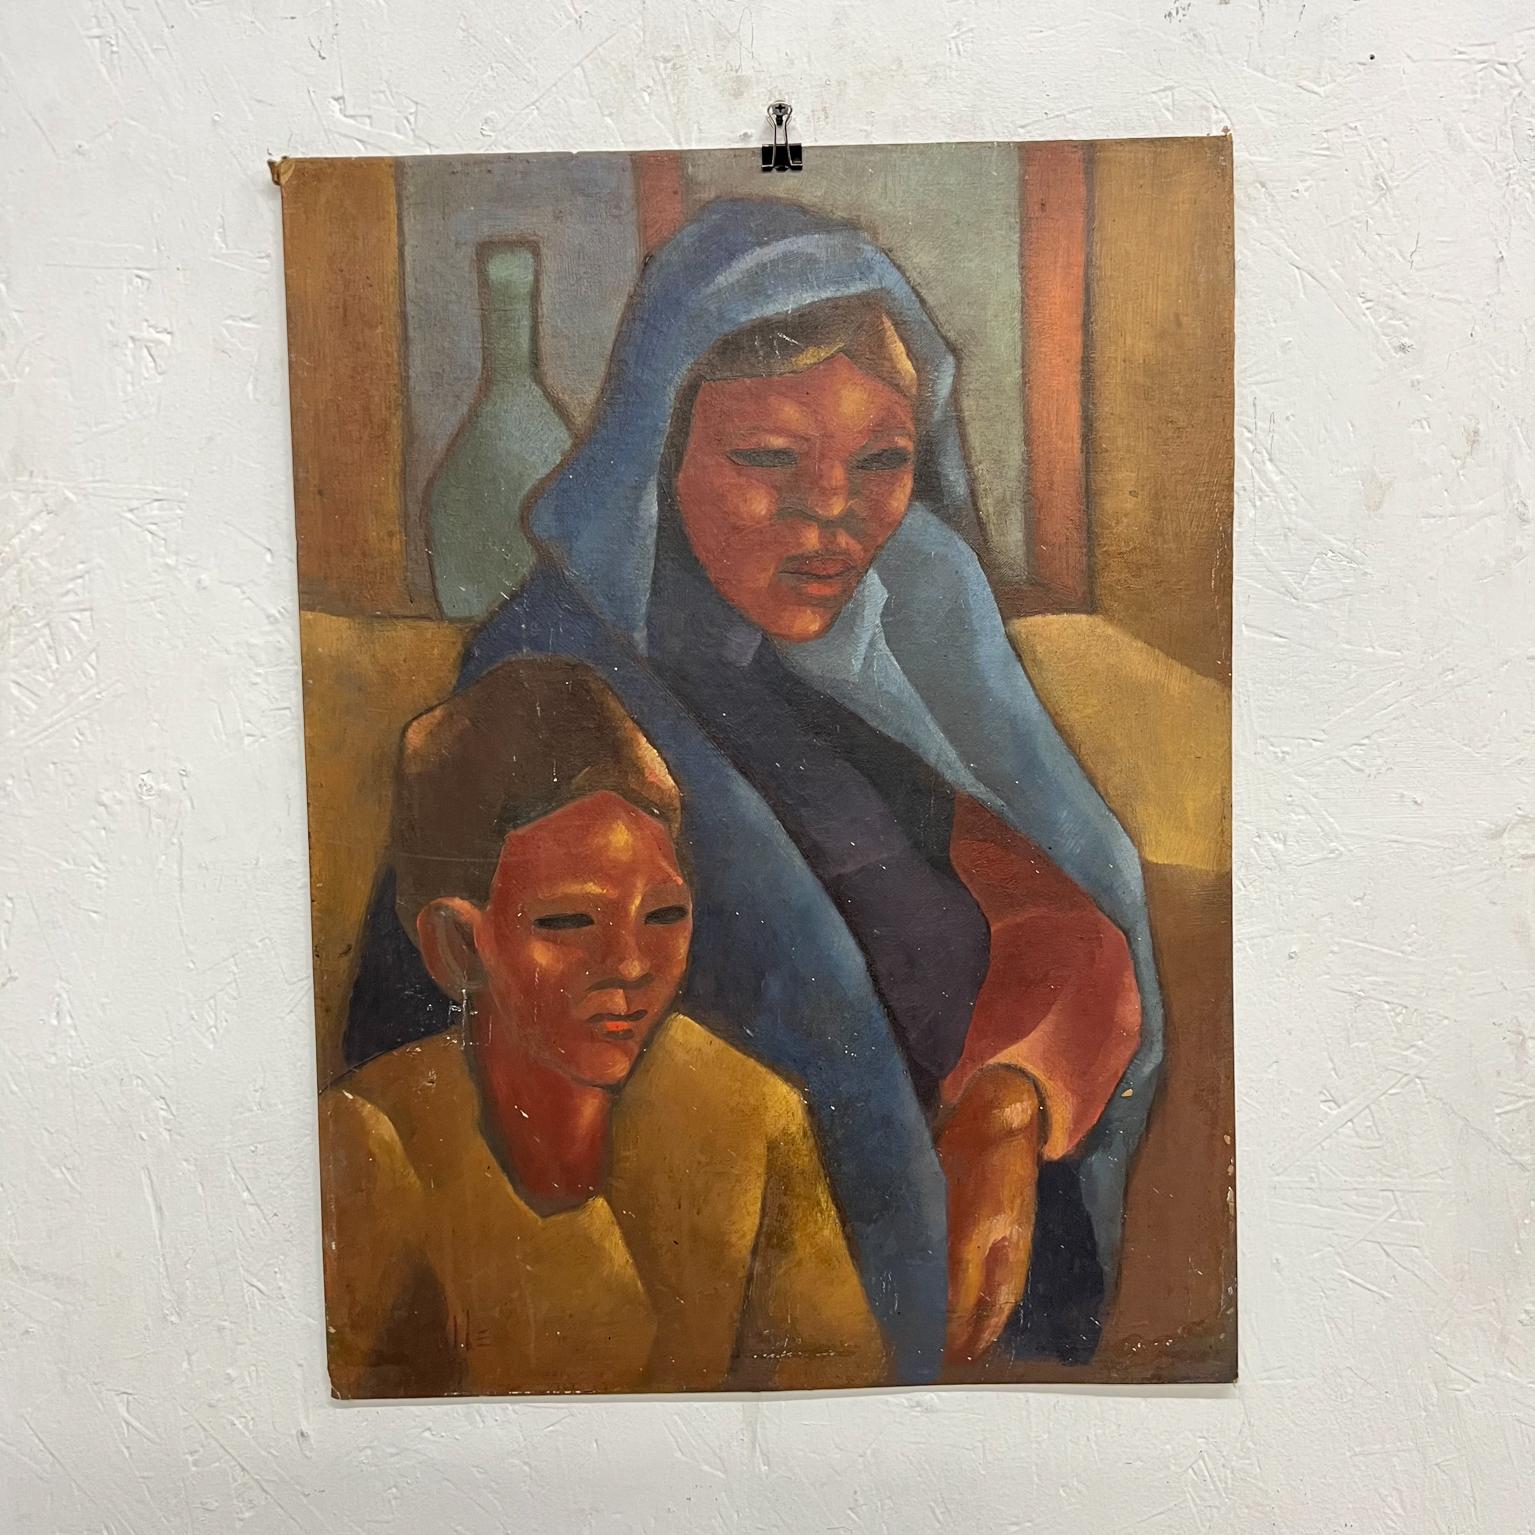 Vintage Art mother and child oil painting on board.
Damage and distressed art vintage original unrestored condition.
See all images provided.
Measures: 18 x 24.